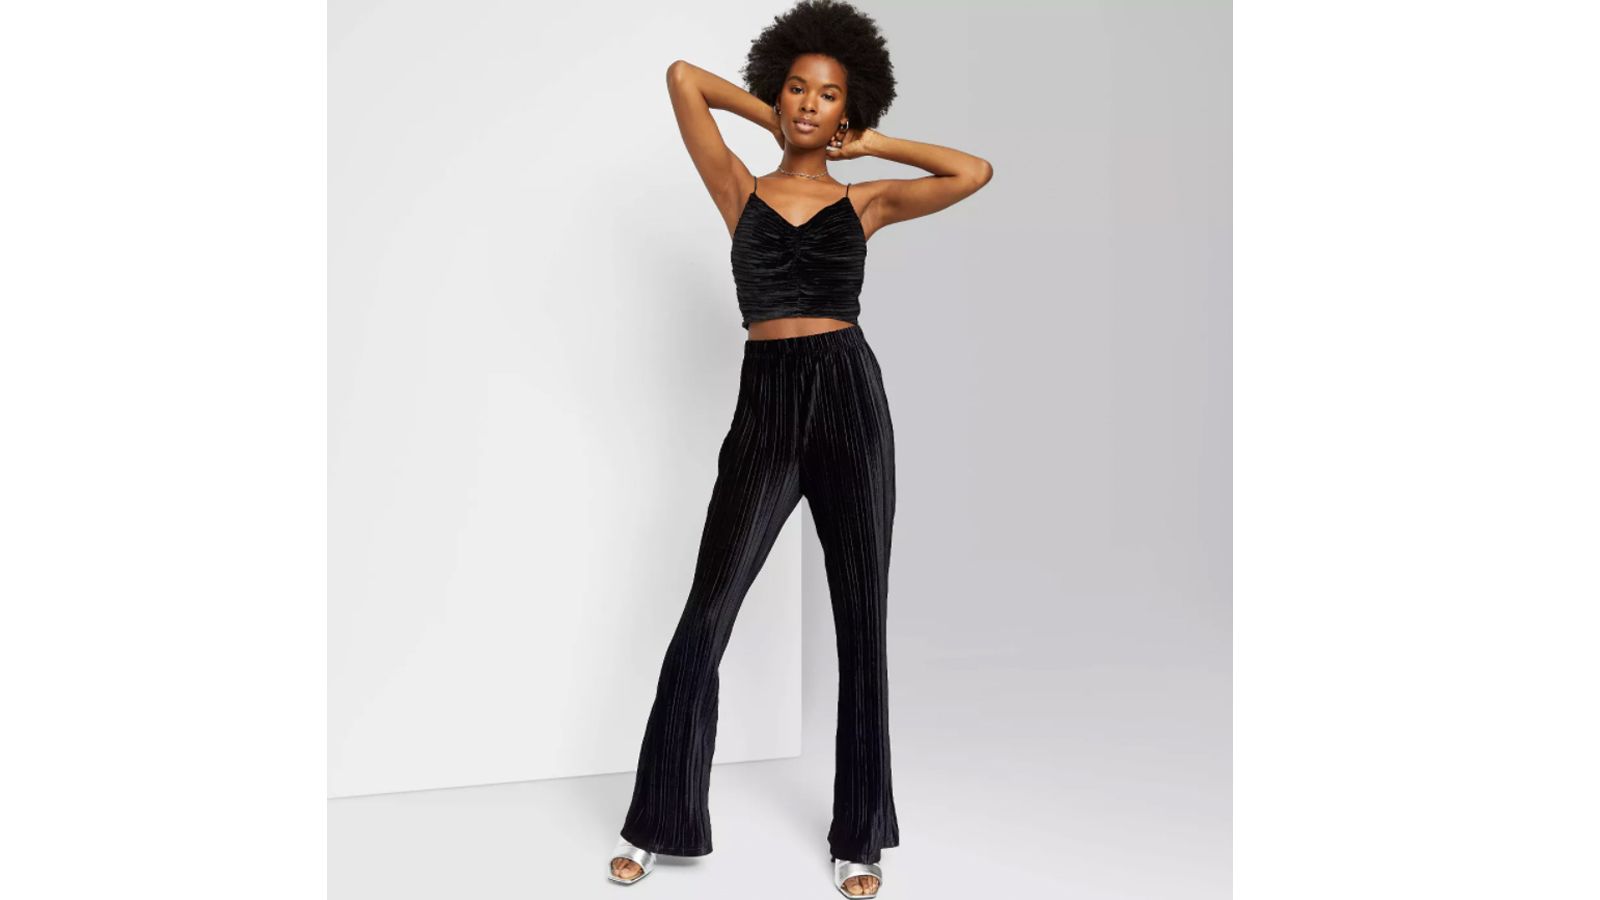 Free People Women's Walk With You Velvet Flare Trousers